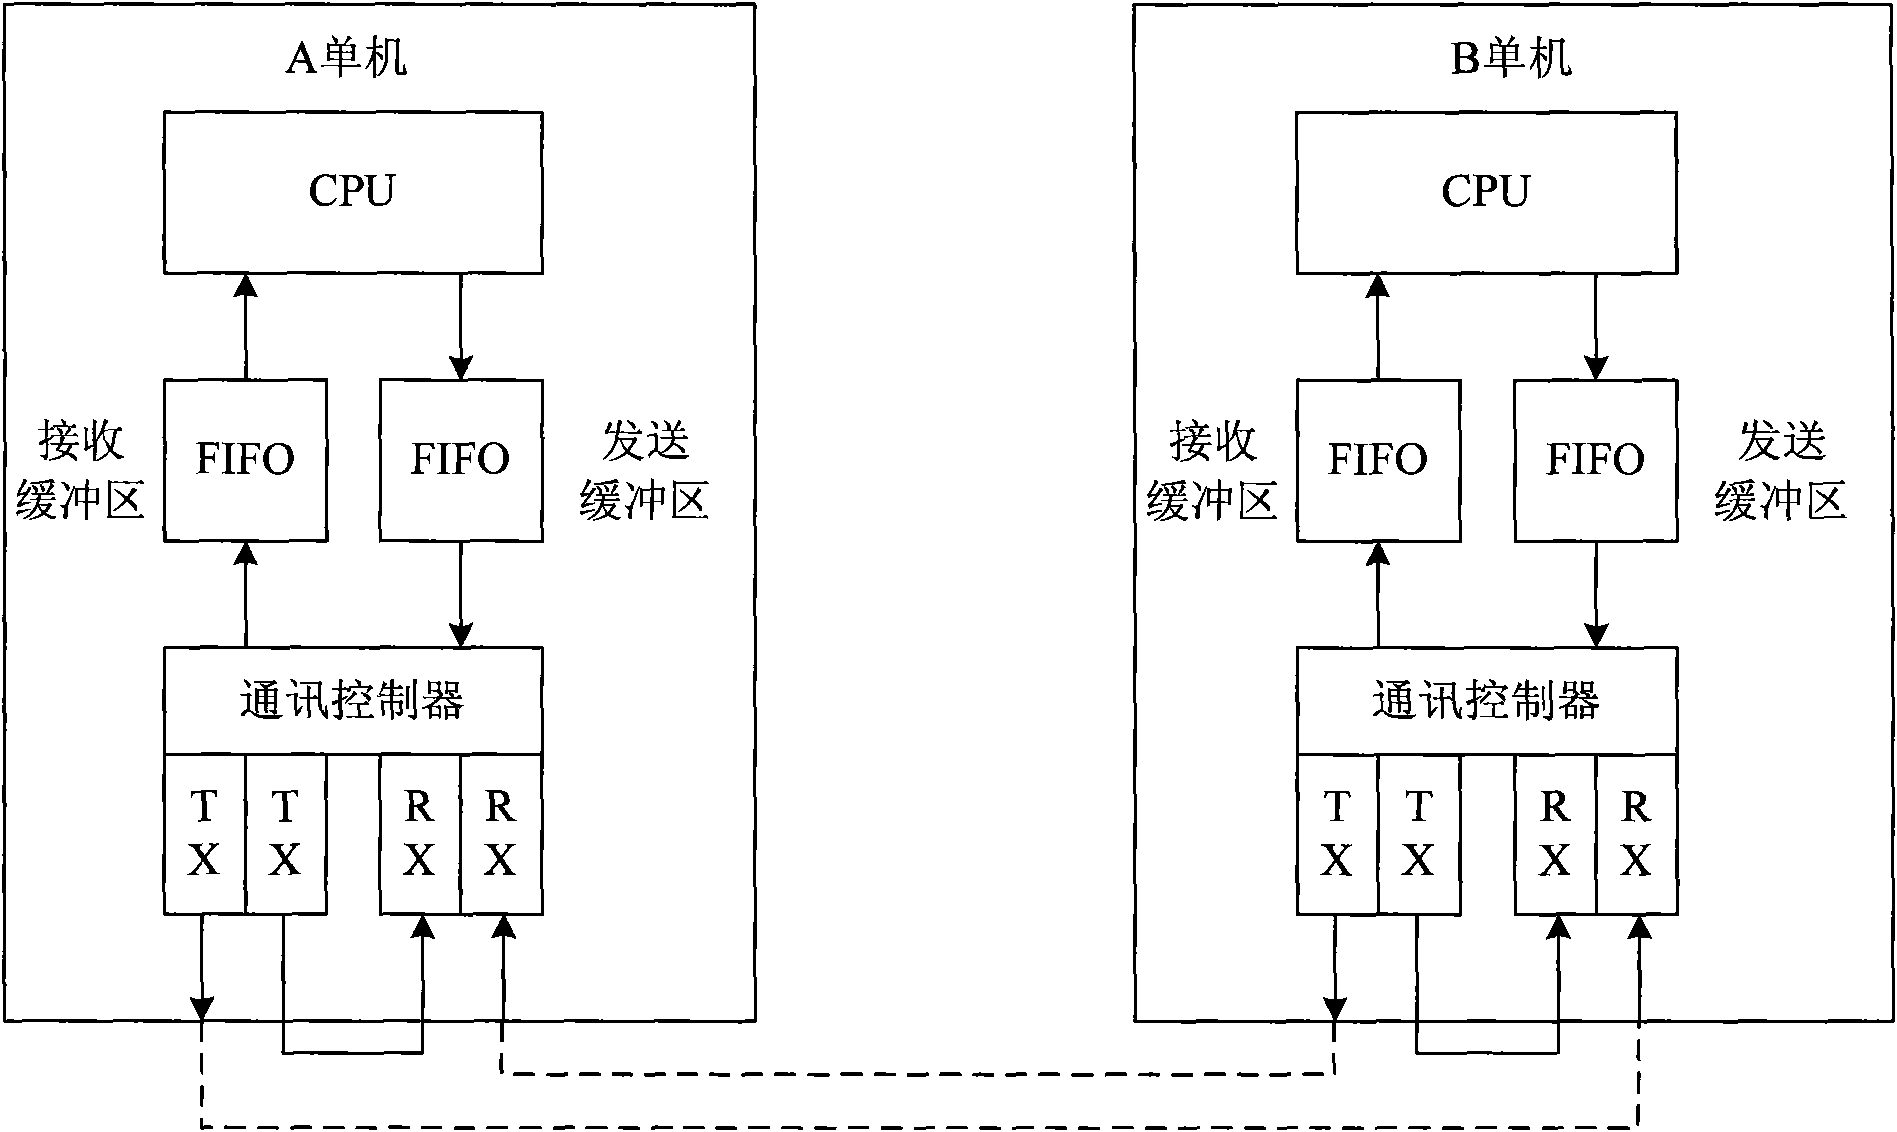 Communicating and synchronous data interaction method of thermal standby redundancy system